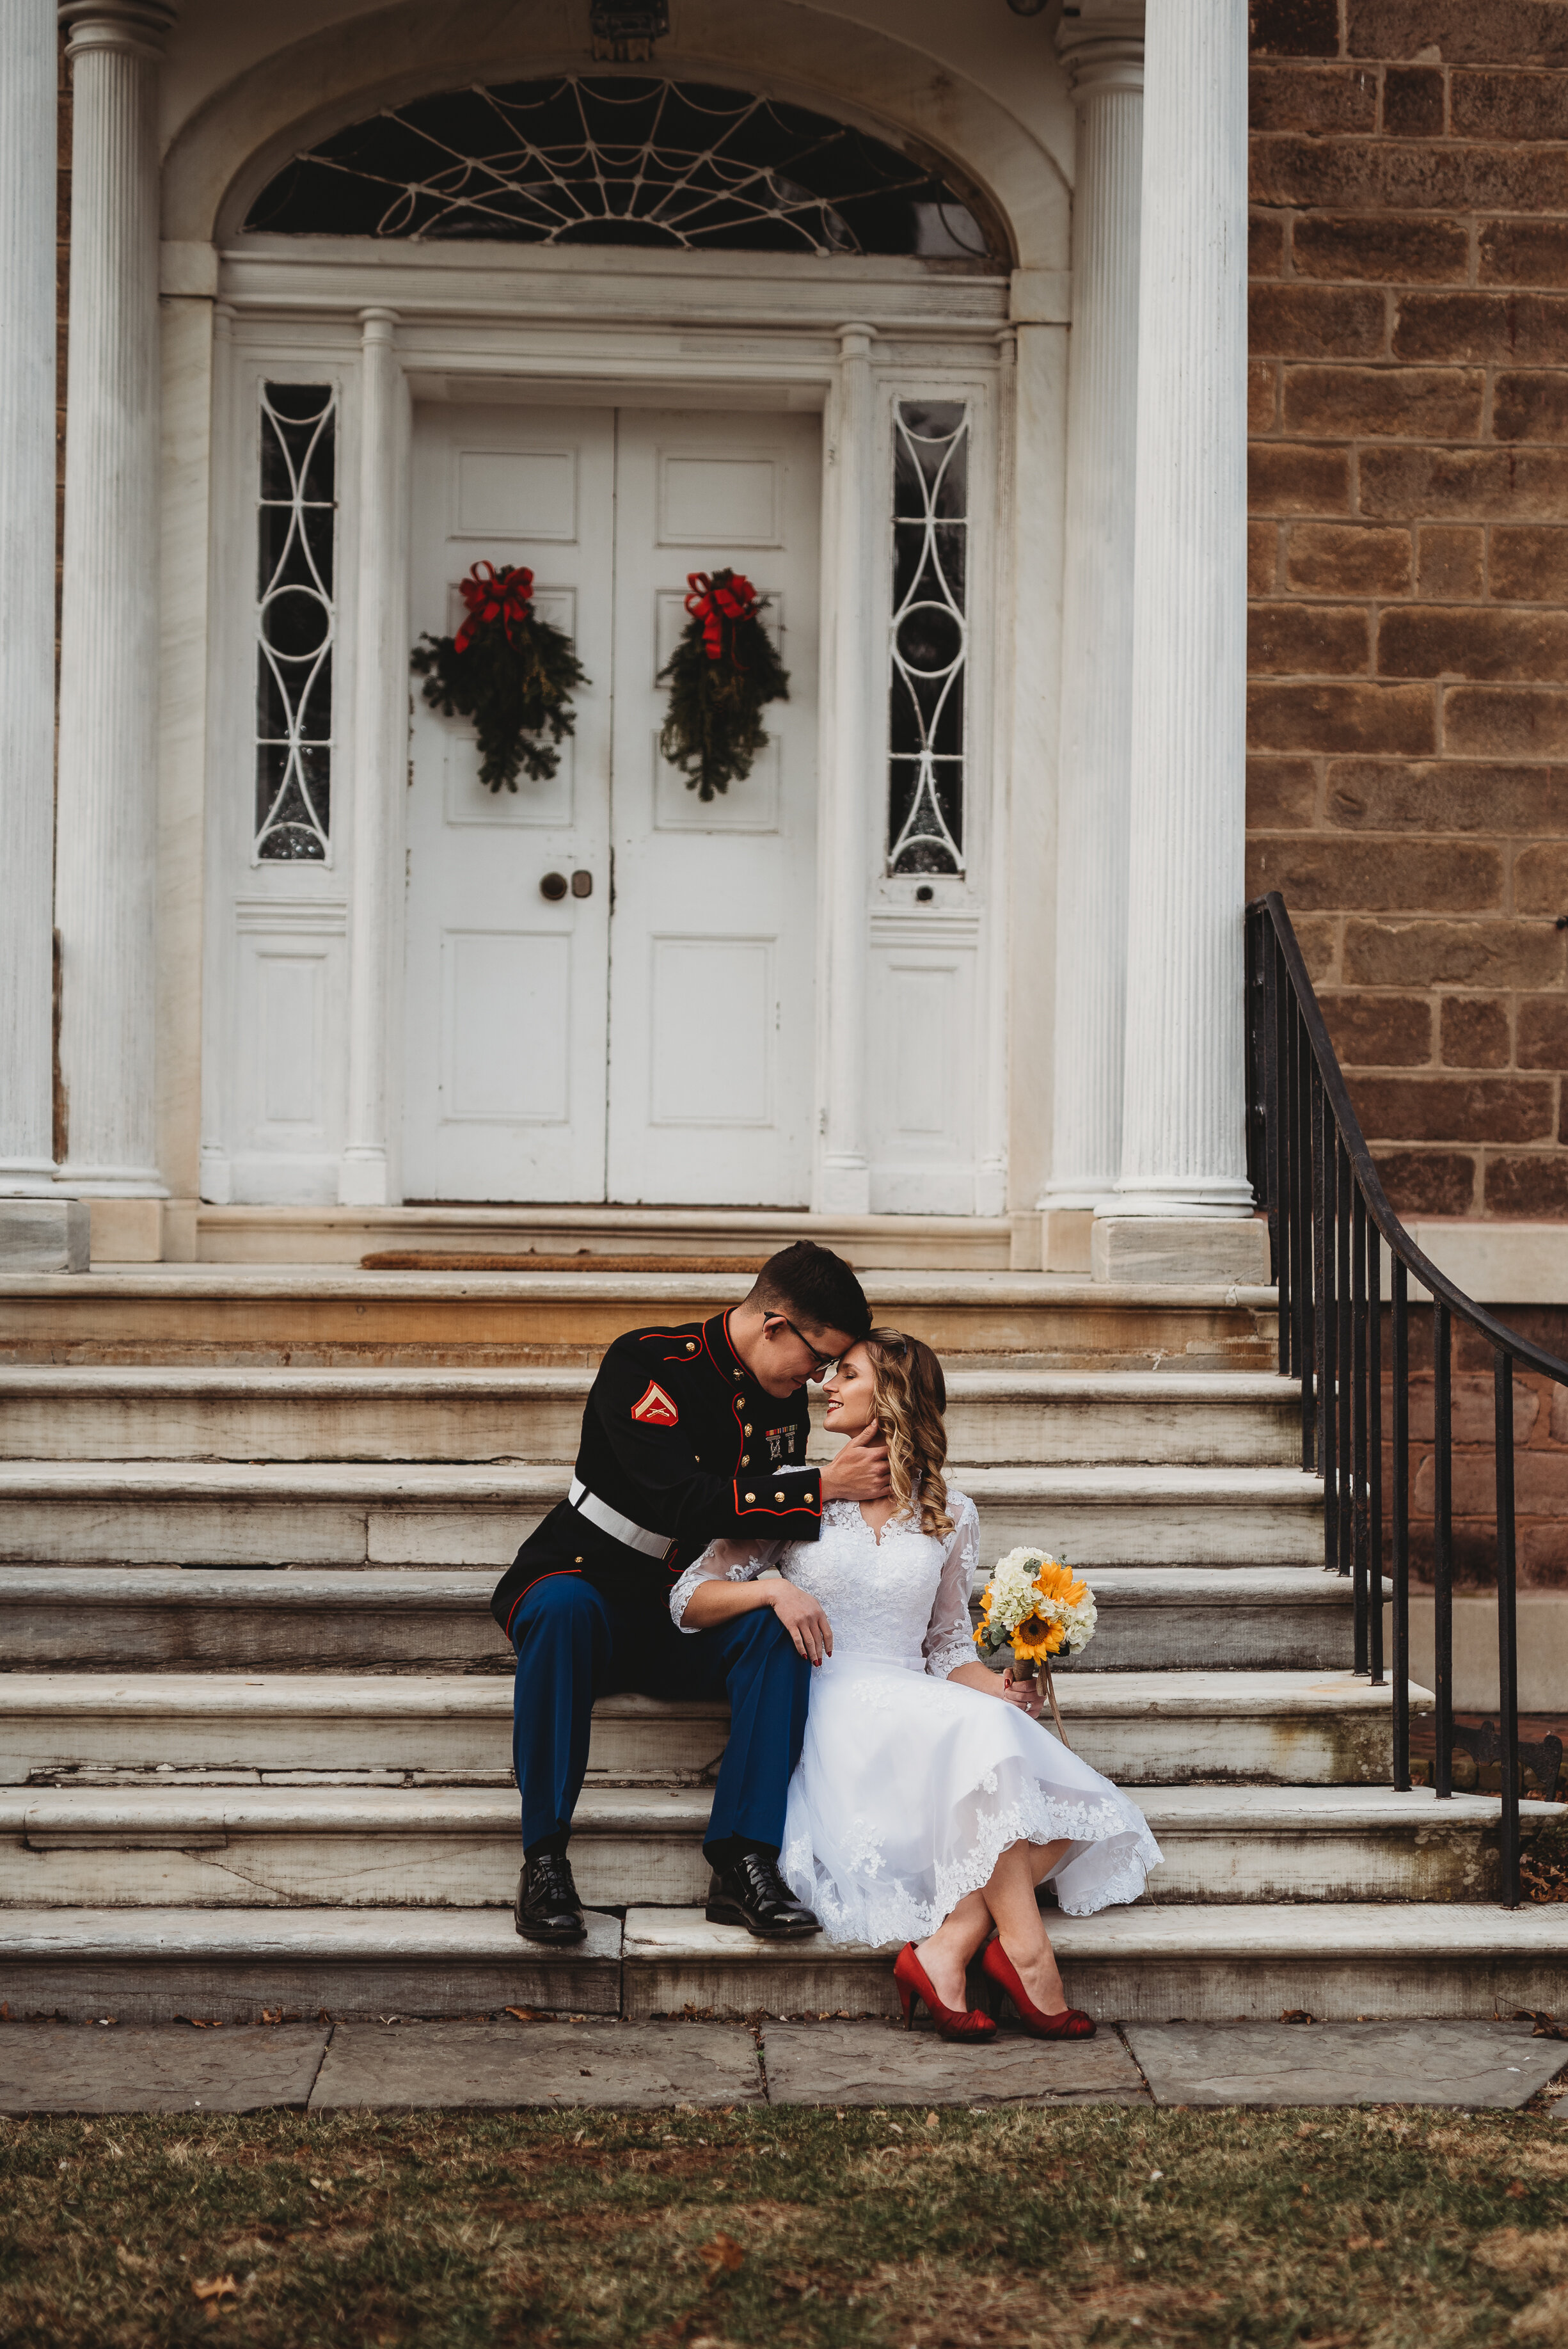 Lily and David's Intimate Church Ceremony and Portraits at The Highlands Mansion